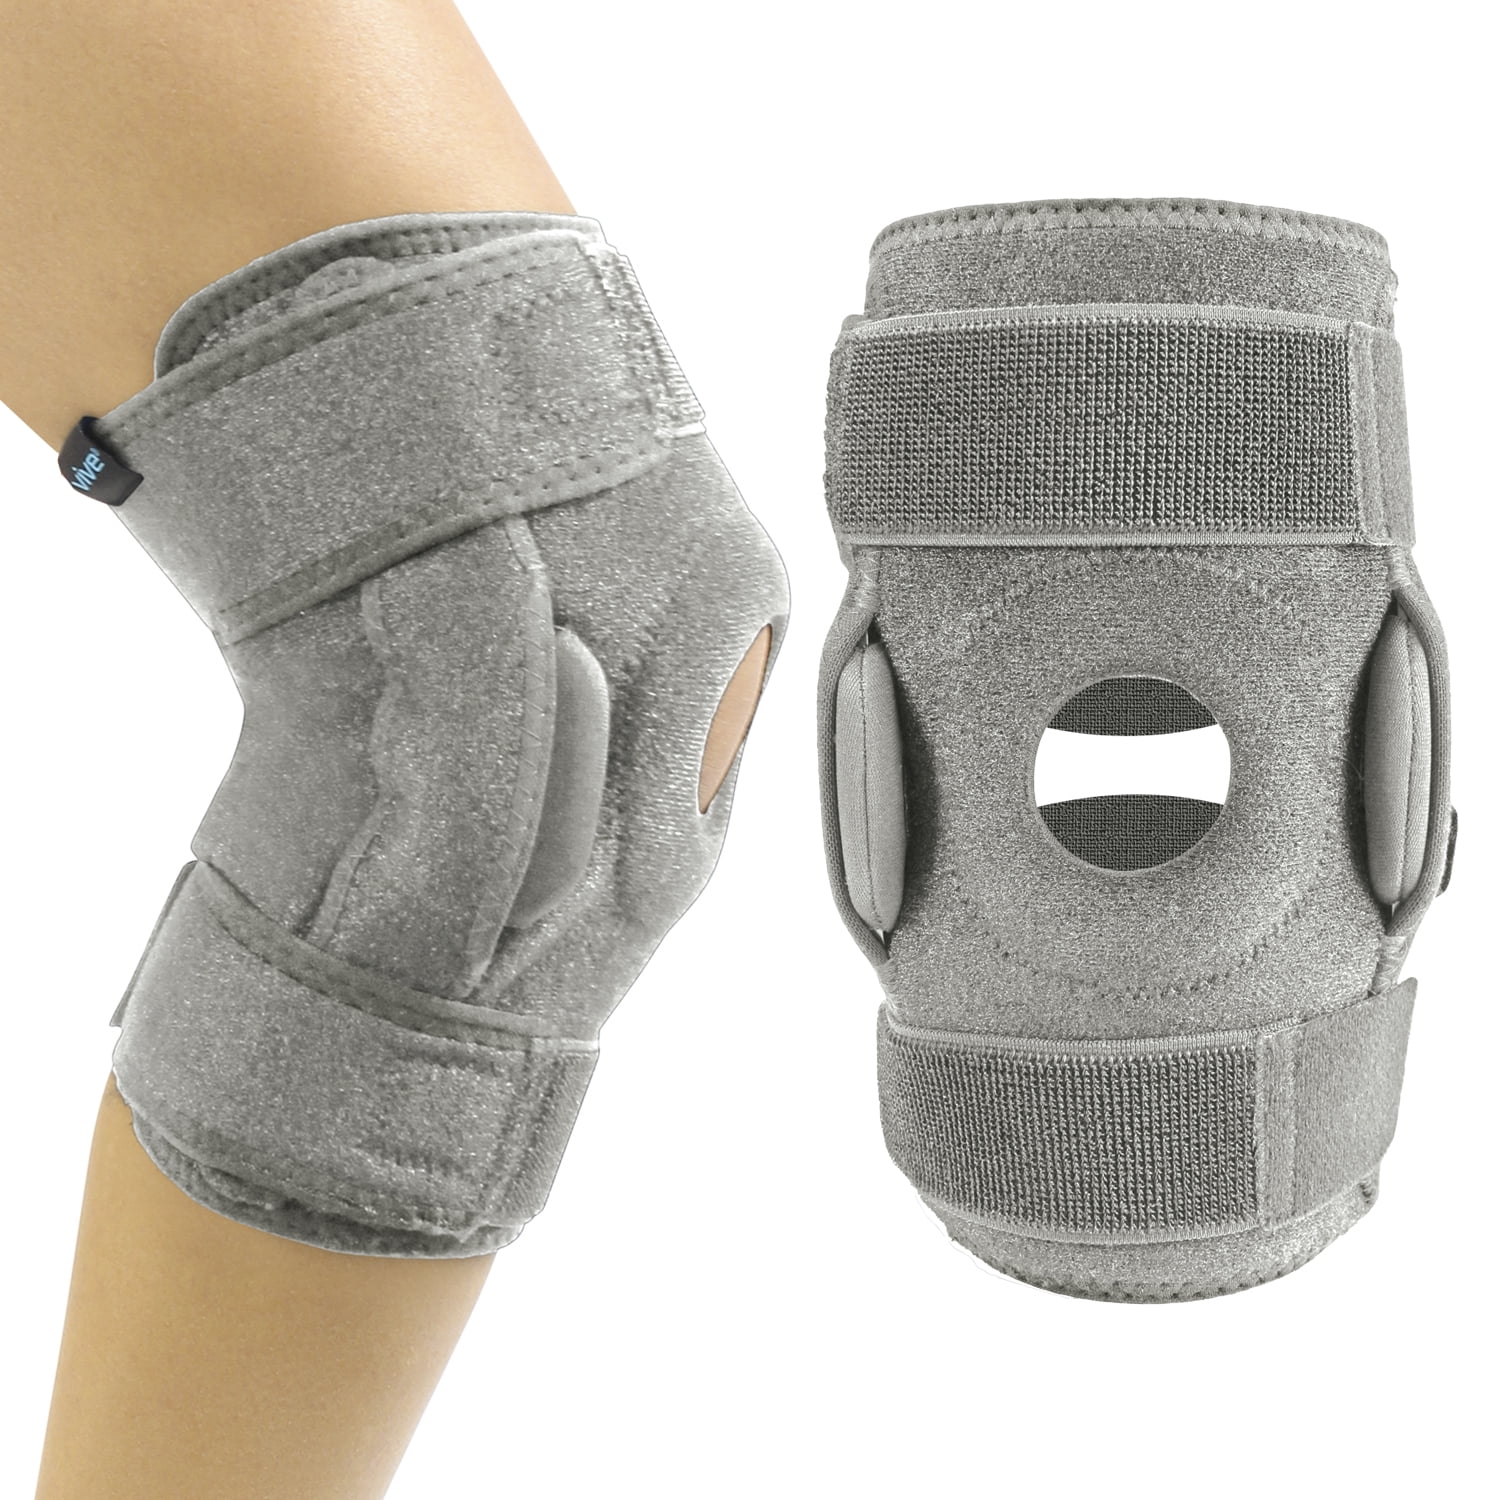 Buy Vive ROM Knee Brace - Hinged Immobilizer for ACL, MCL and PCL Injury -  Orthosis Stabilizer for Women and Men - Adjustable Recovery Support for  Orthopedic Rehab, Post Op, Meniscus Tear